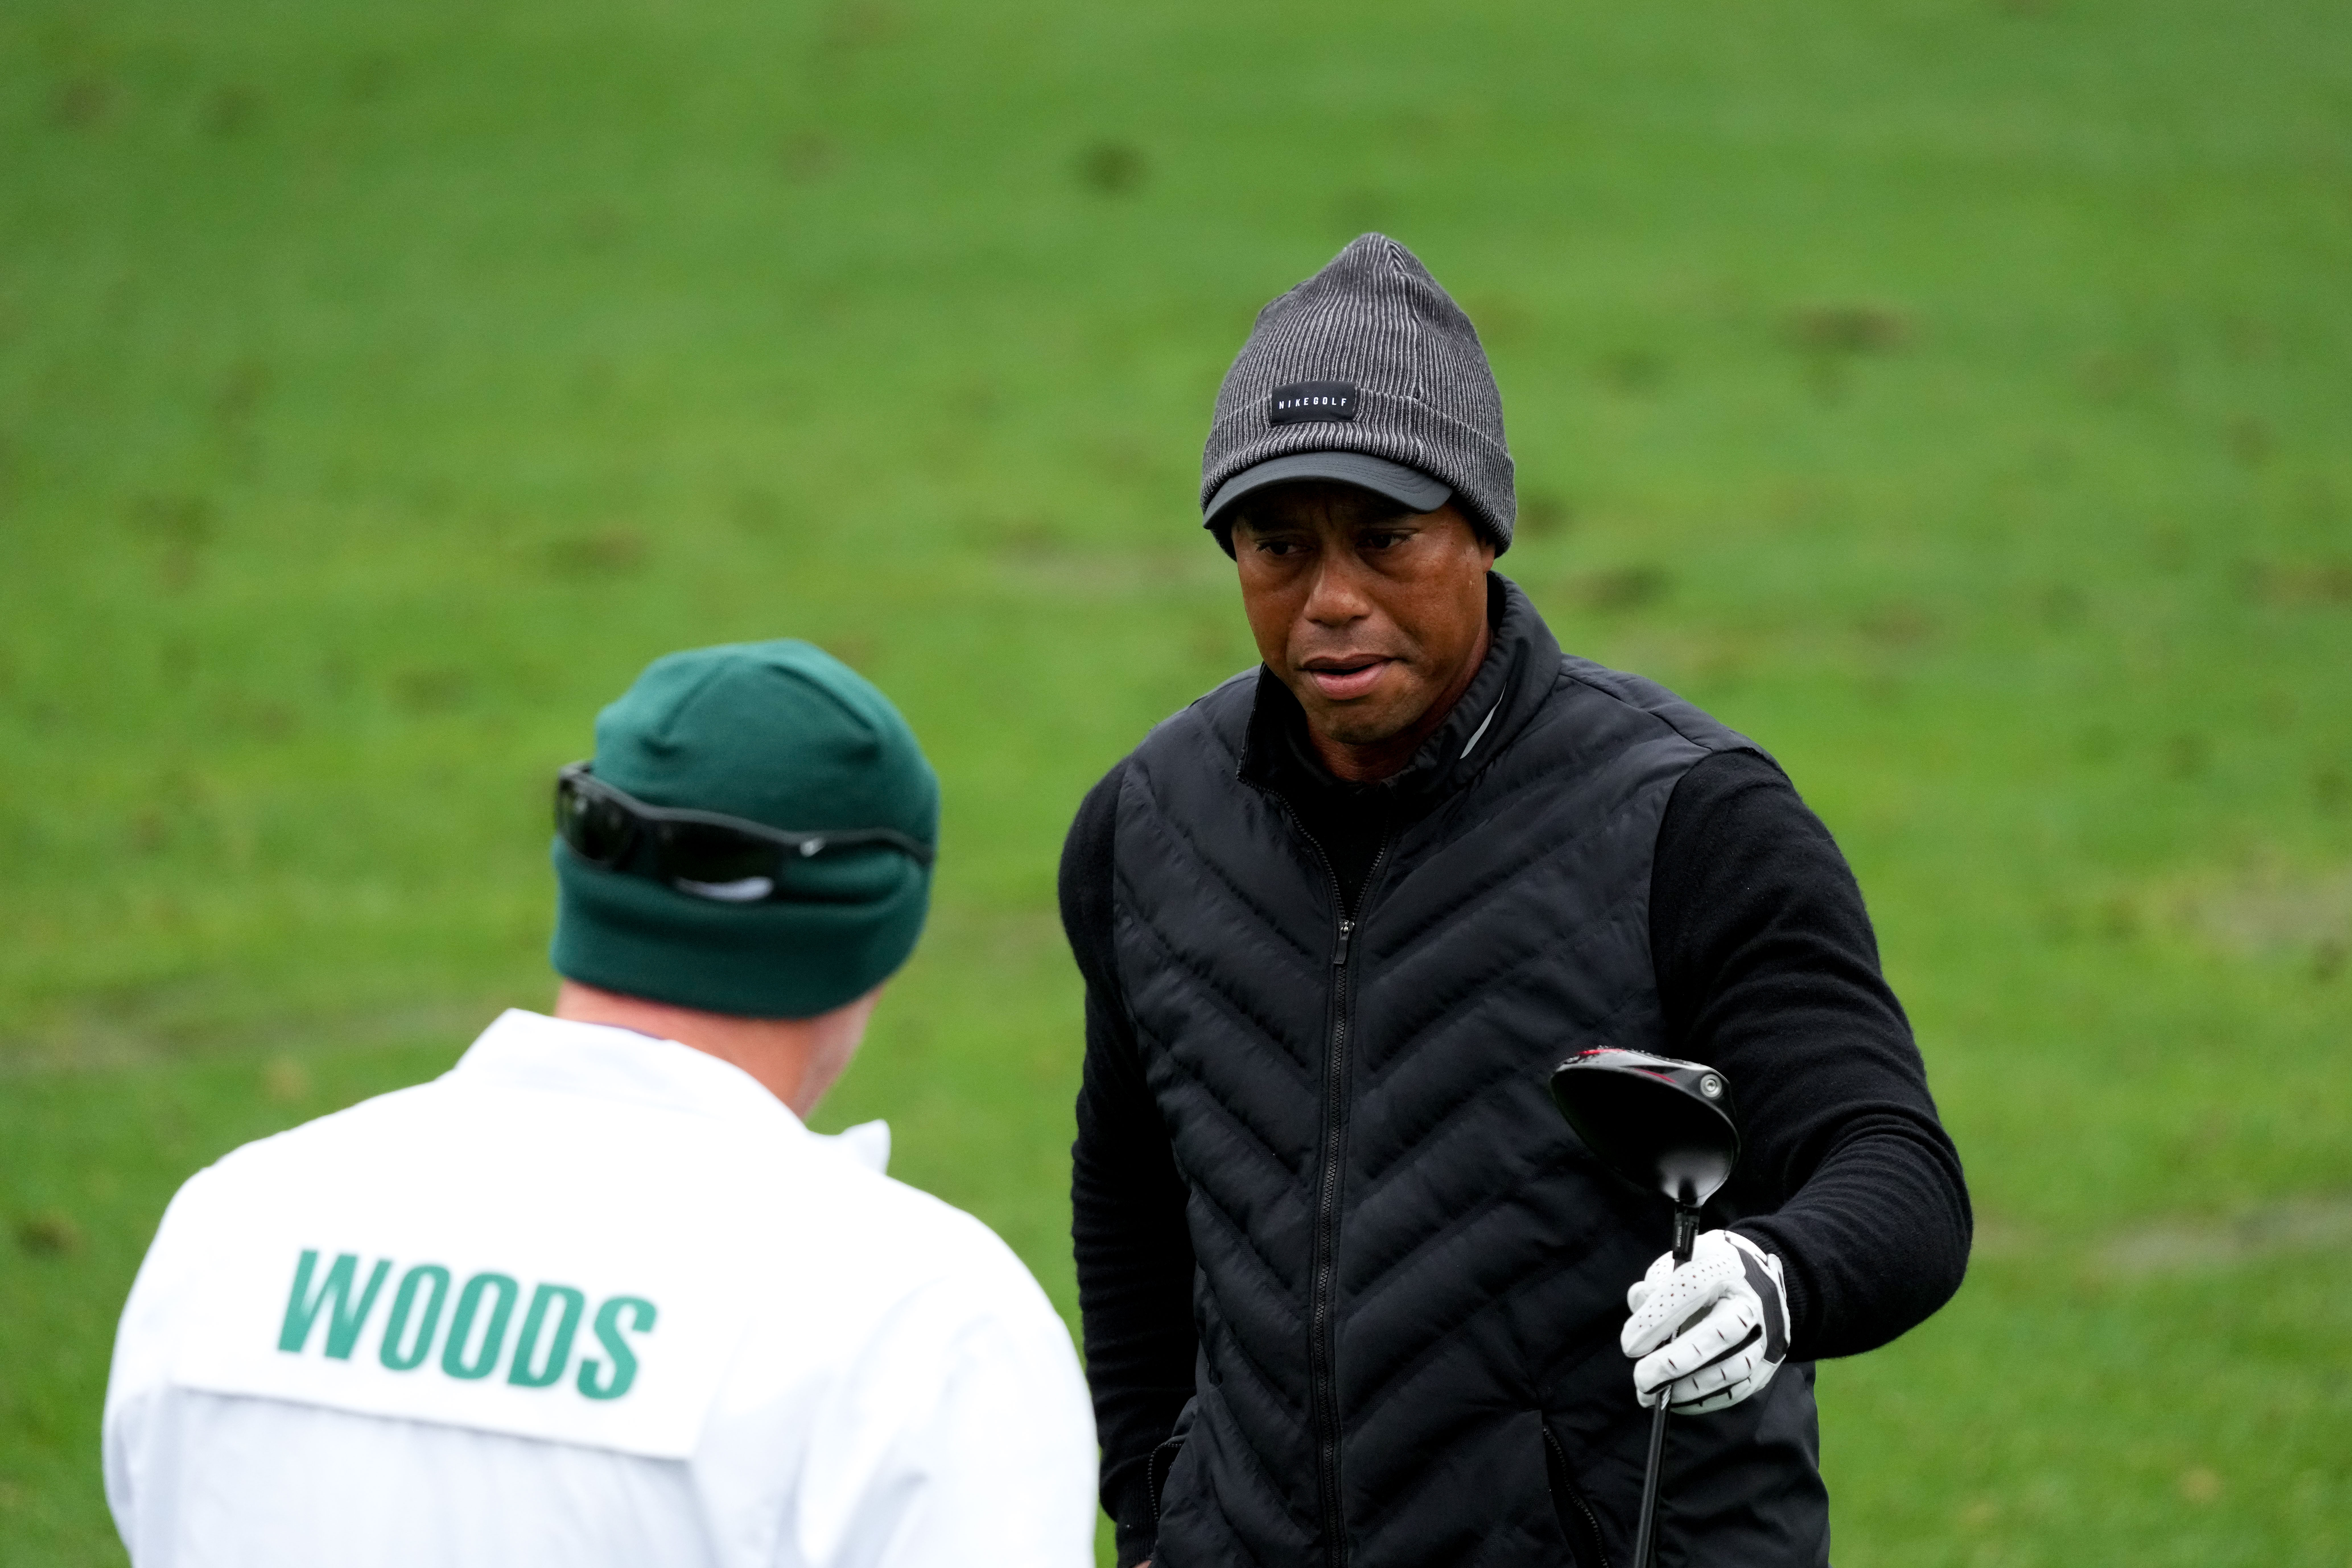 After Tiger Woods’ WDs from the Masters, fans respond with an outpouring of love and concern